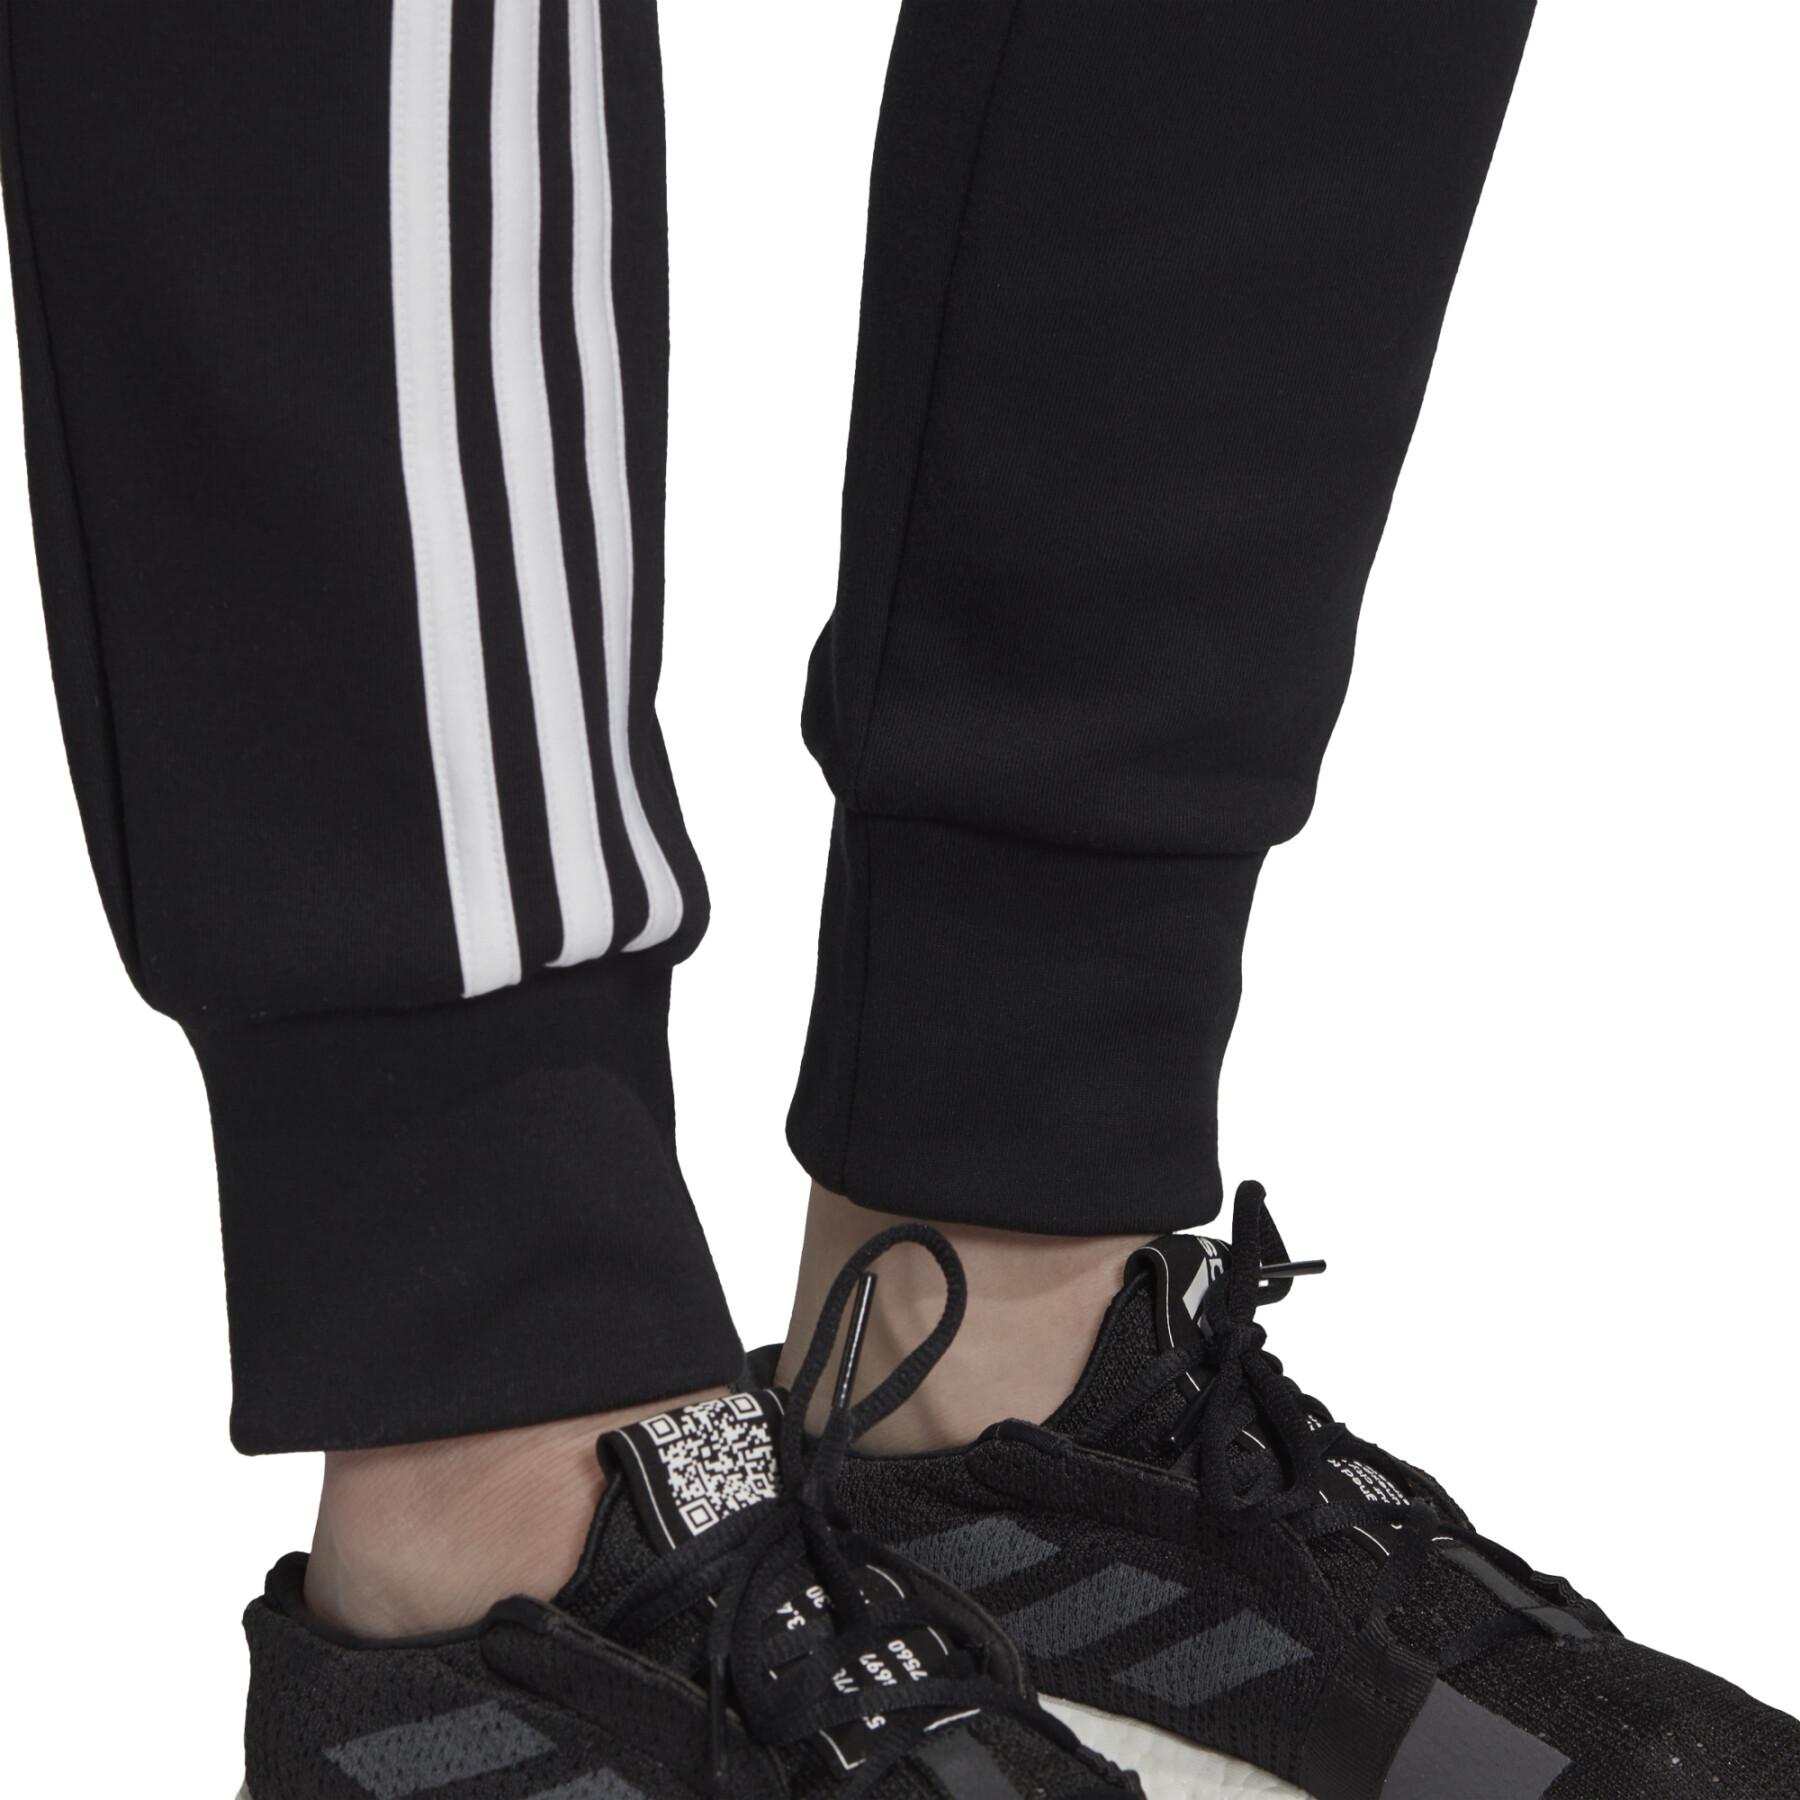 Women's trousers adidas Must Haves 3-Stripes